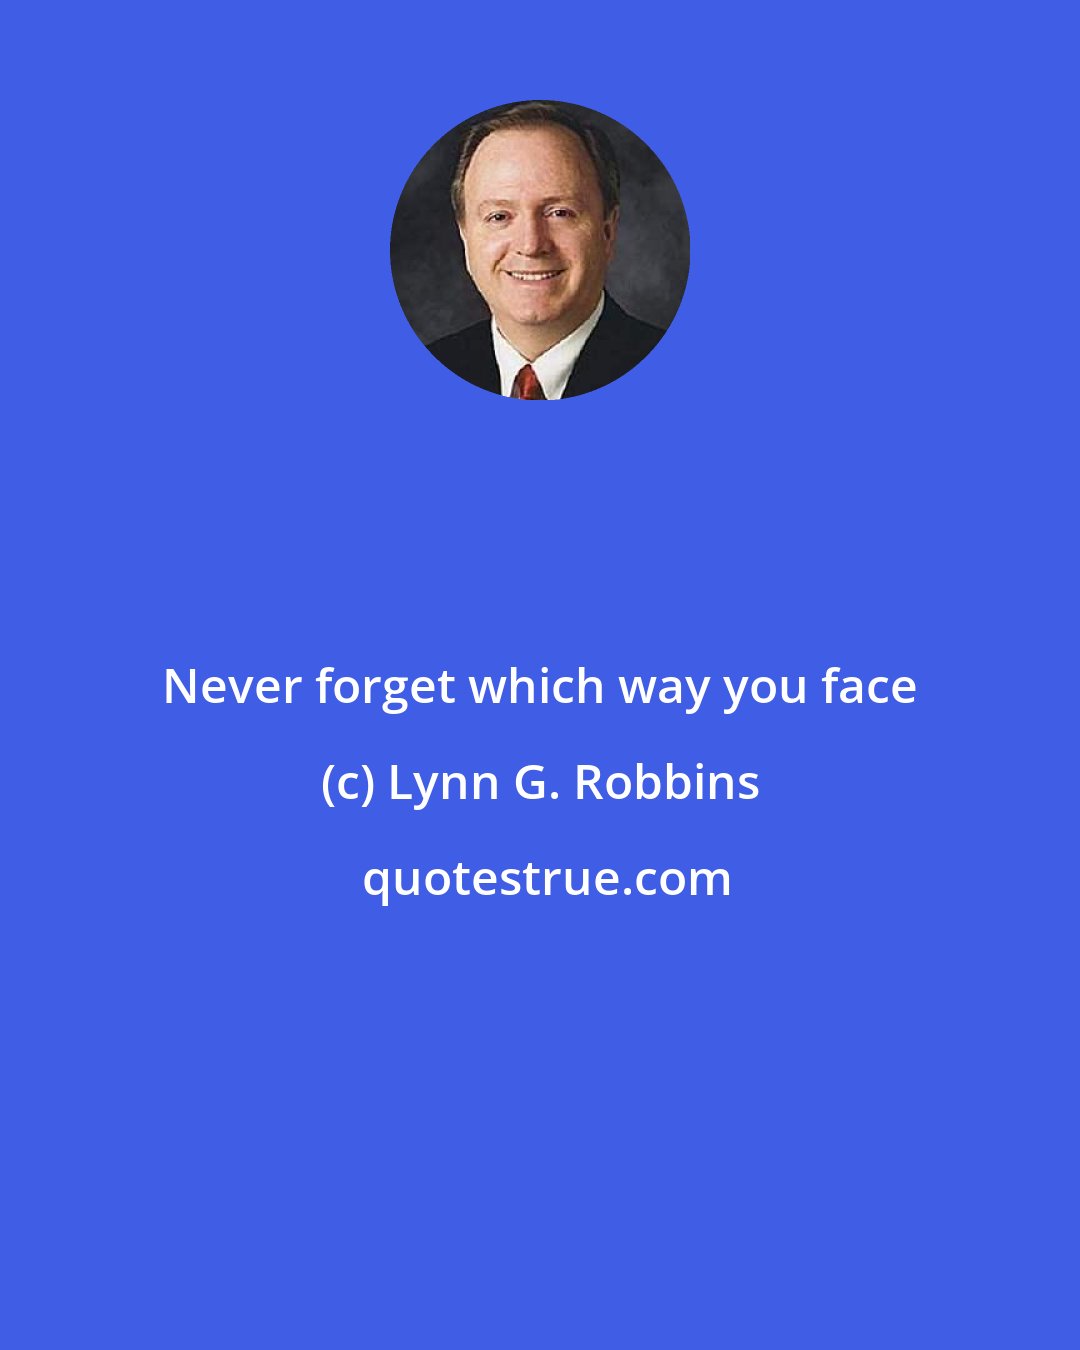 Lynn G. Robbins: Never forget which way you face